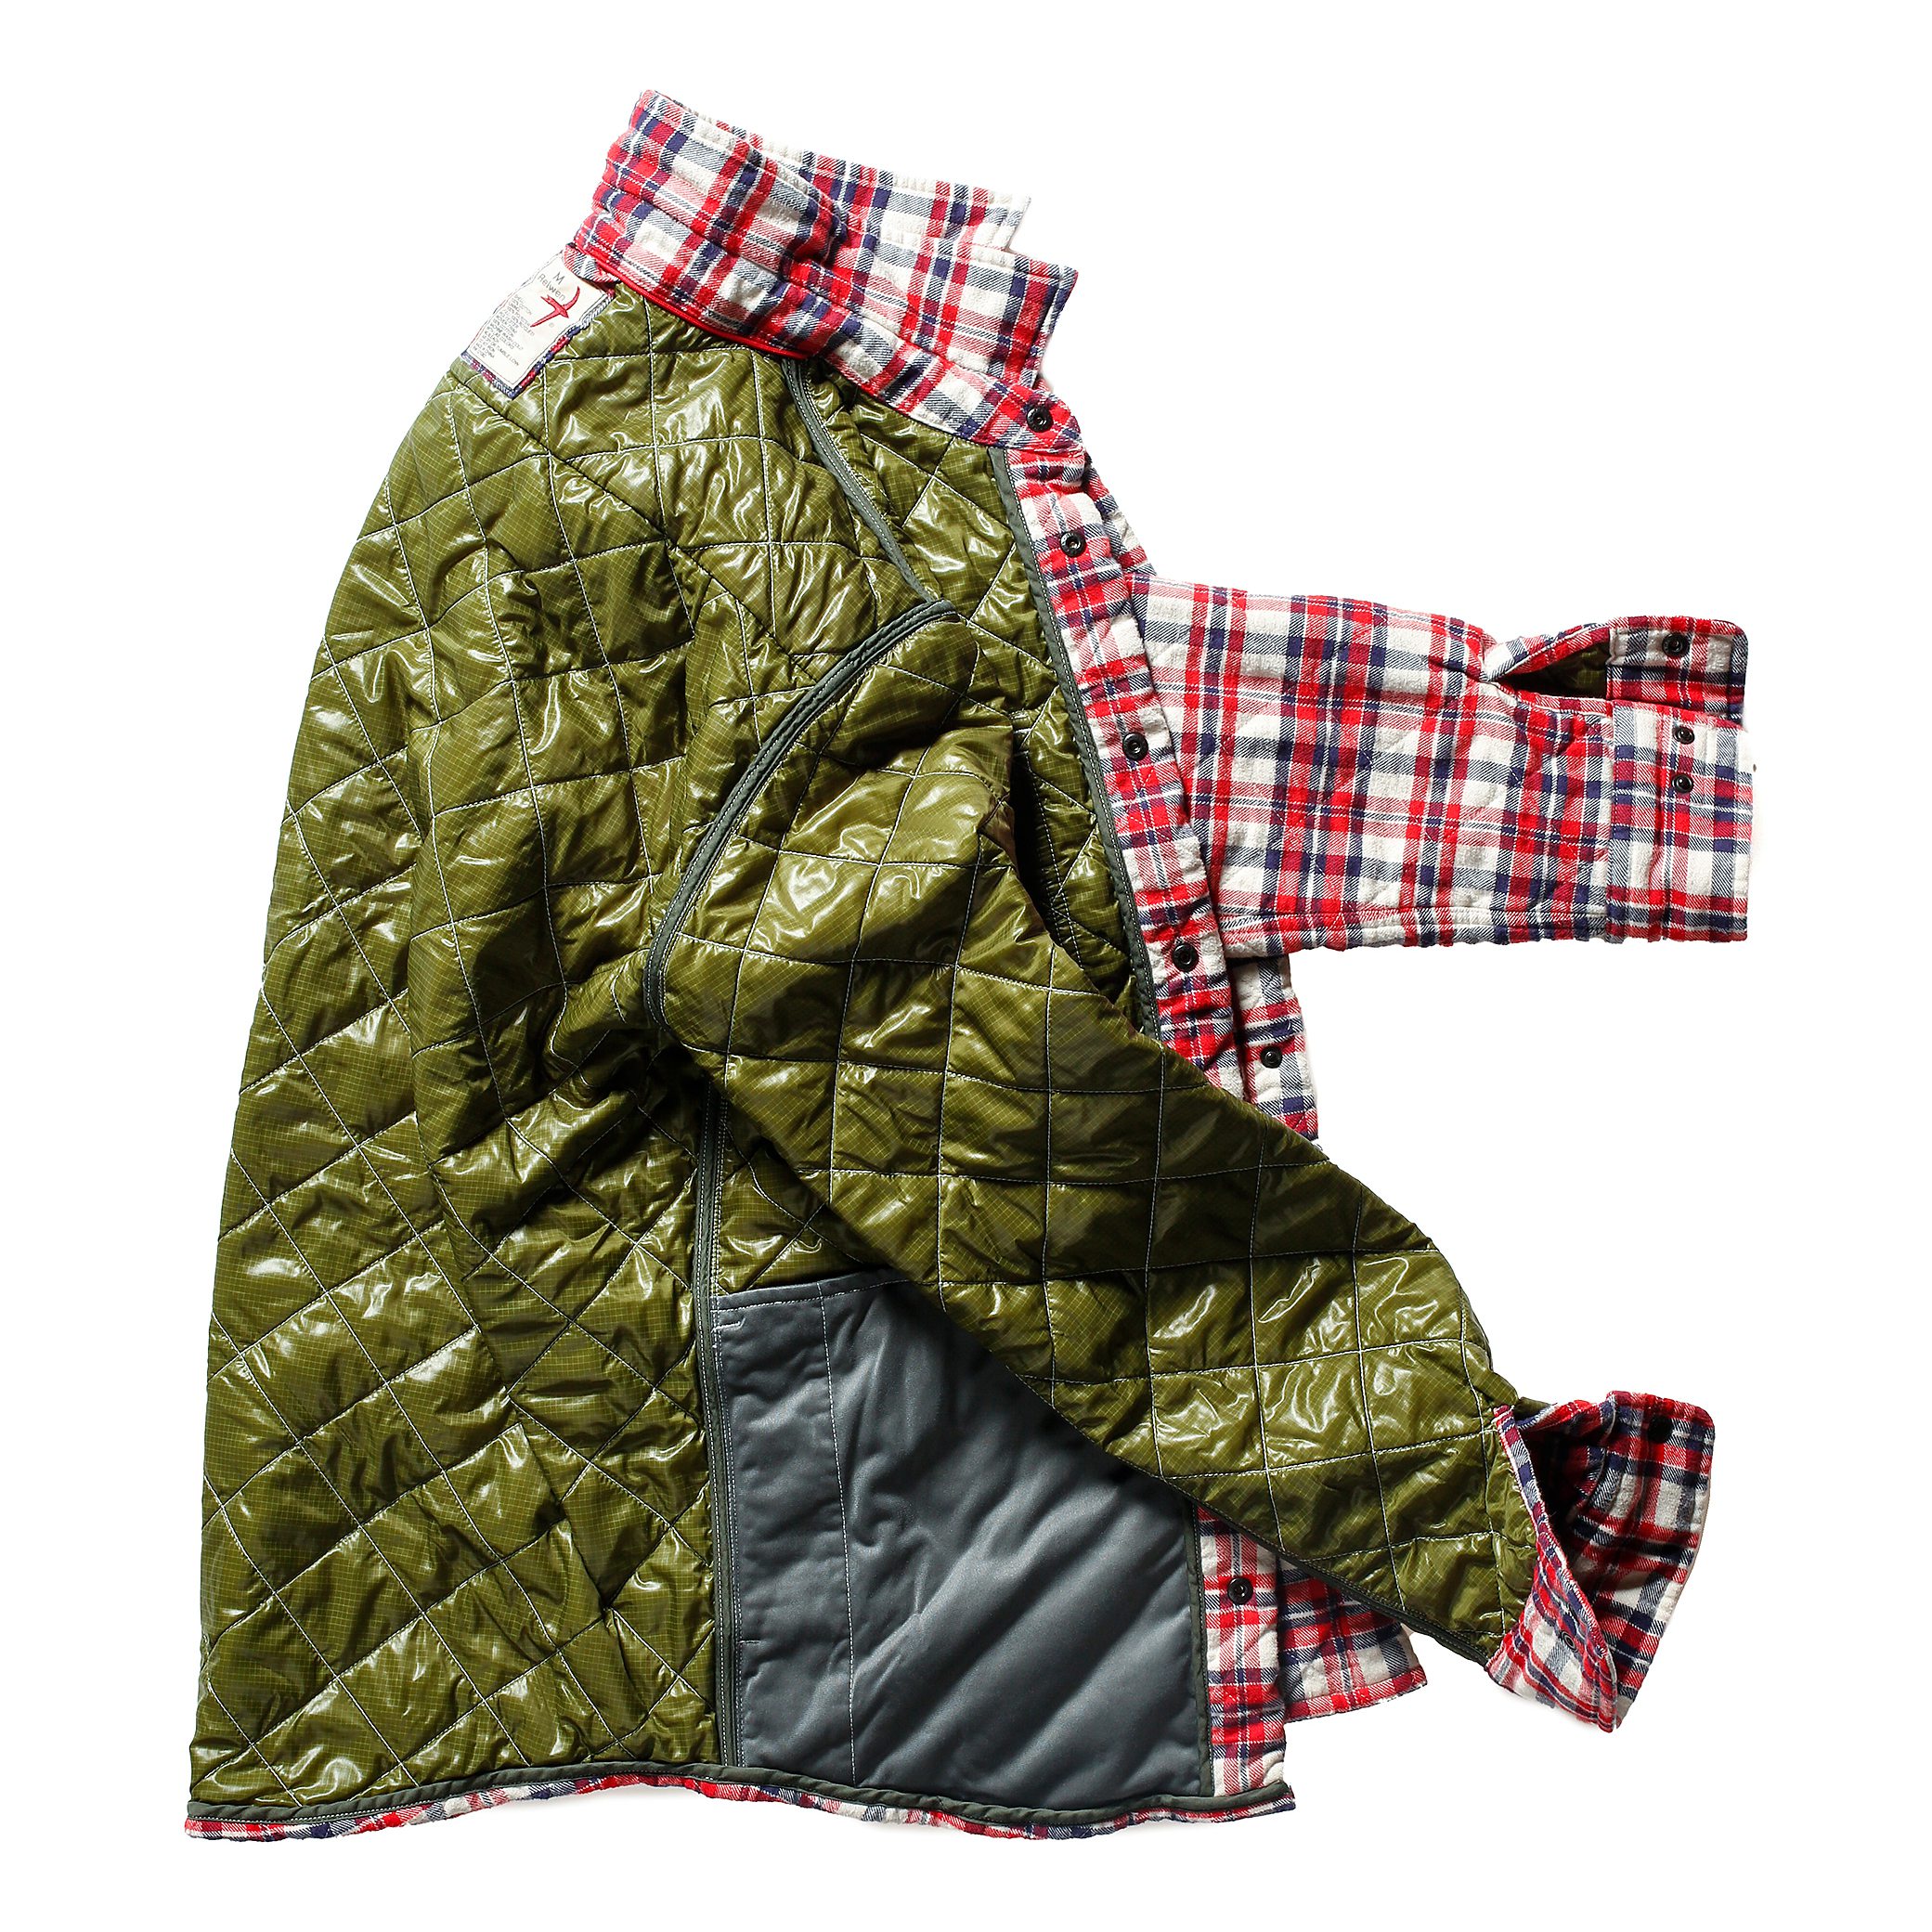 Relwen Quilted Flannel Shirt Jacket - White/Red/Blue Plaid | Shirt